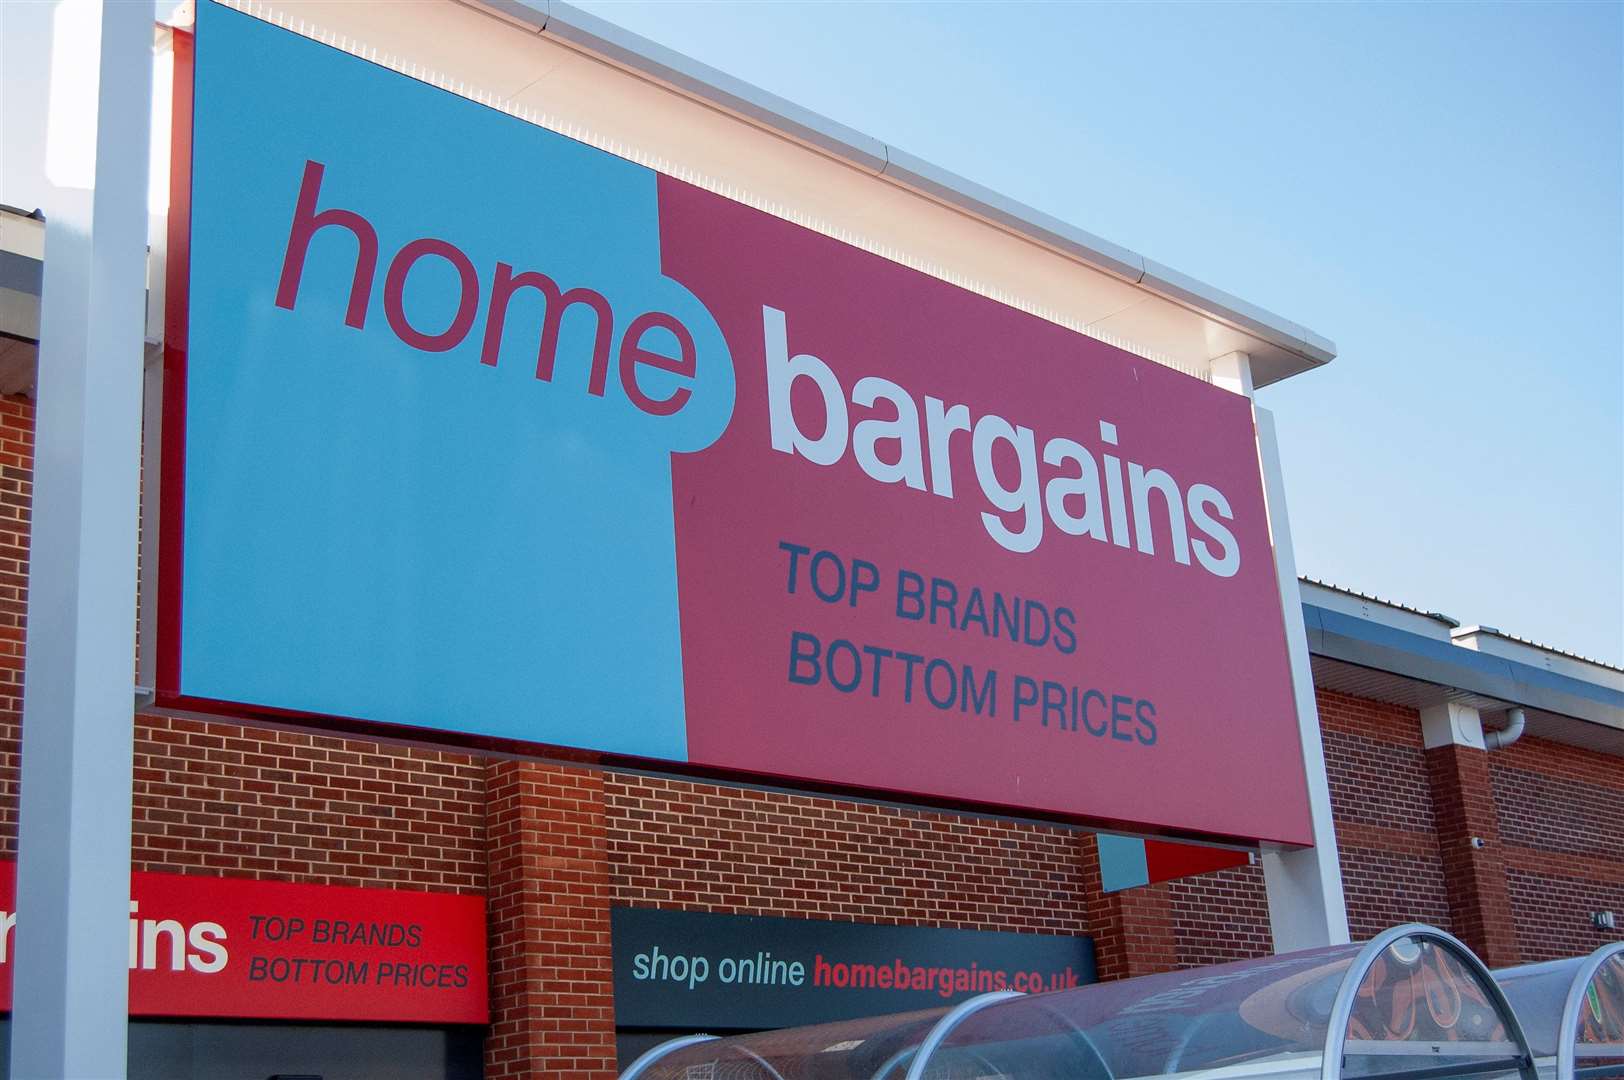 Home Bargains wants to build a new store in Inverness.